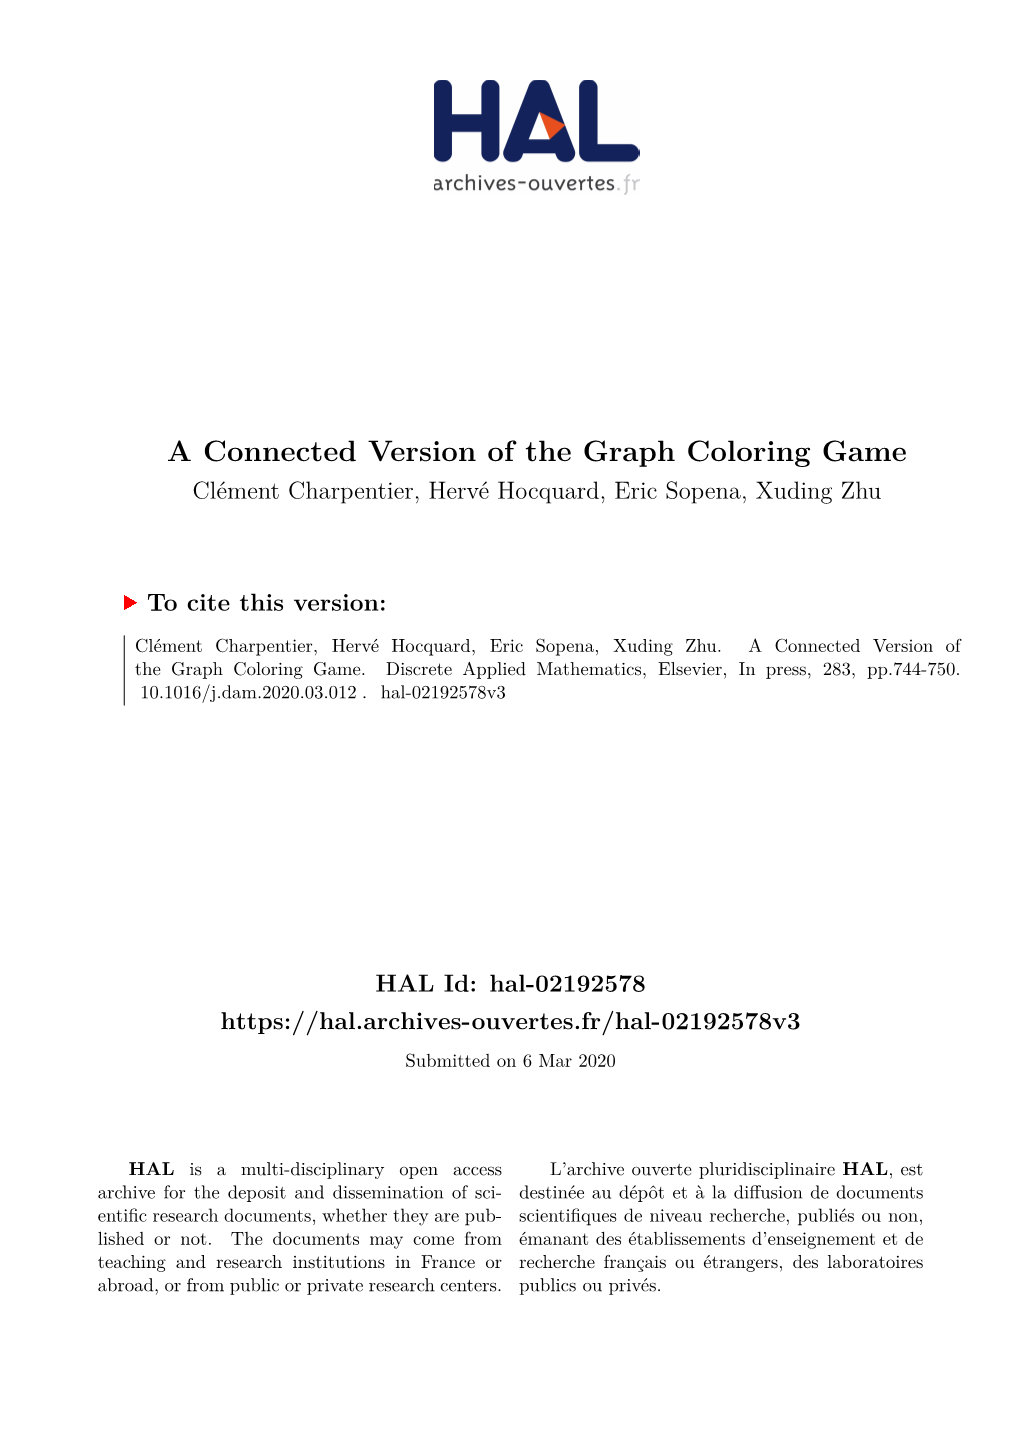 A Connected Version of the Graph Coloring Game Clément Charpentier, Hervé Hocquard, Eric Sopena, Xuding Zhu